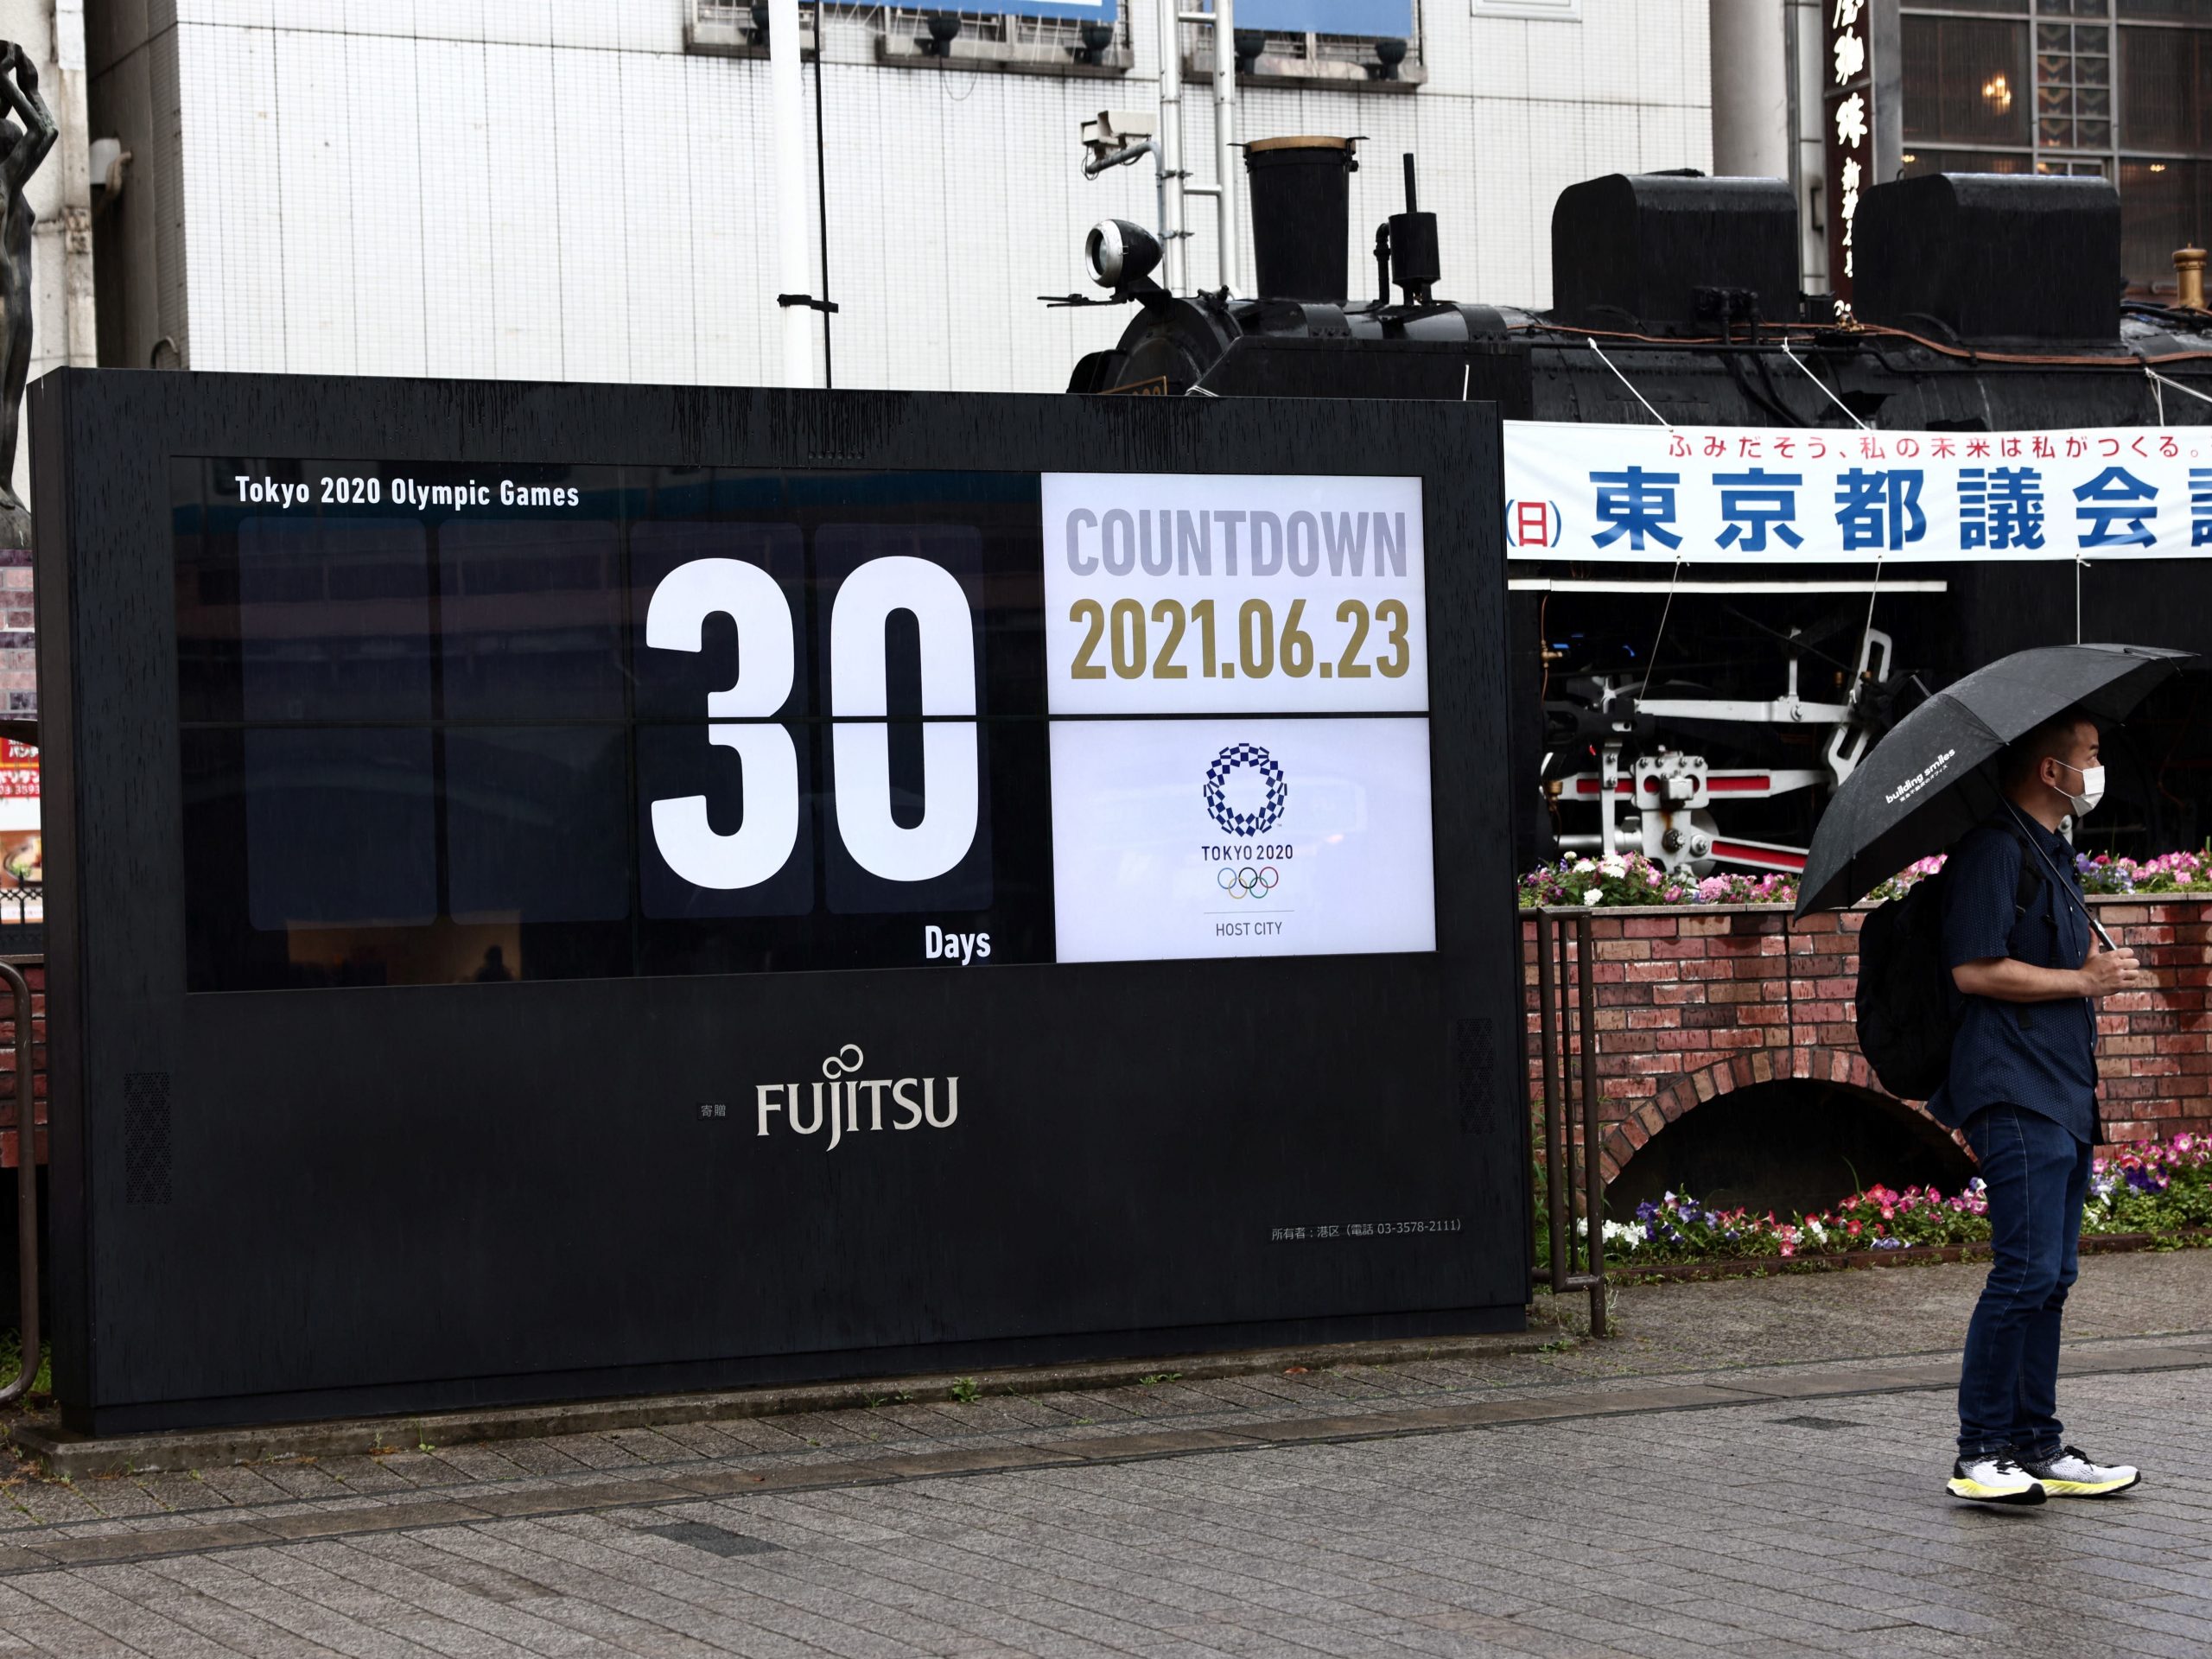 The countdown clock for the Tokyo 2020 Olympic Games is displayed, 30 days before the opening ceremony, in Tokyo, June 23, 2021.